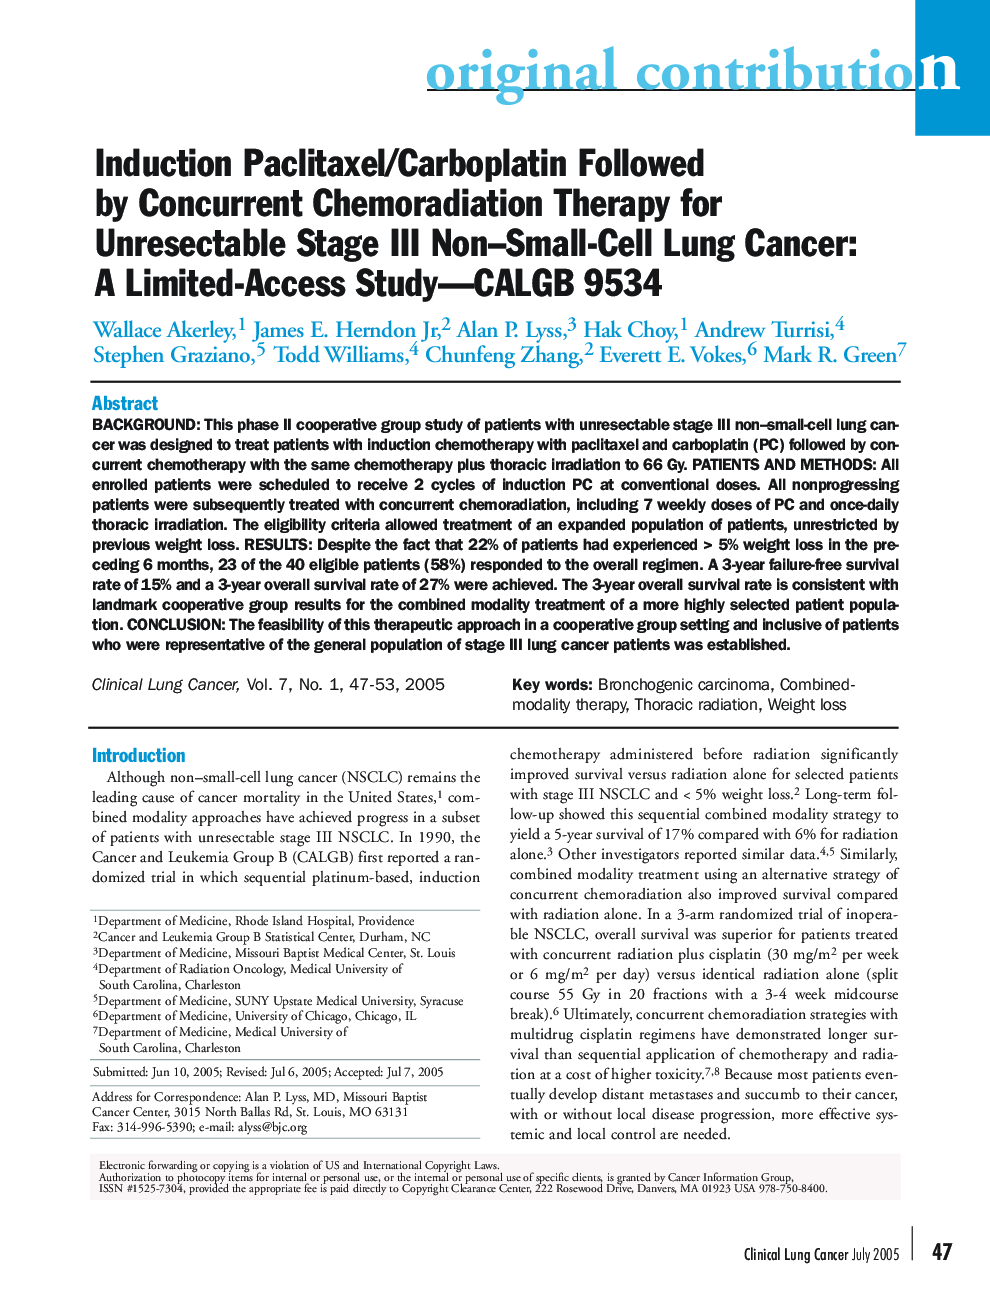 Induction Paclitaxel/Carboplatin Followed by Concurrent Chemoradiation Therapy for Unresectable Stage III Non-Small-Cell Lung Cancer: A Limited-Access Study (CALGB 9534)